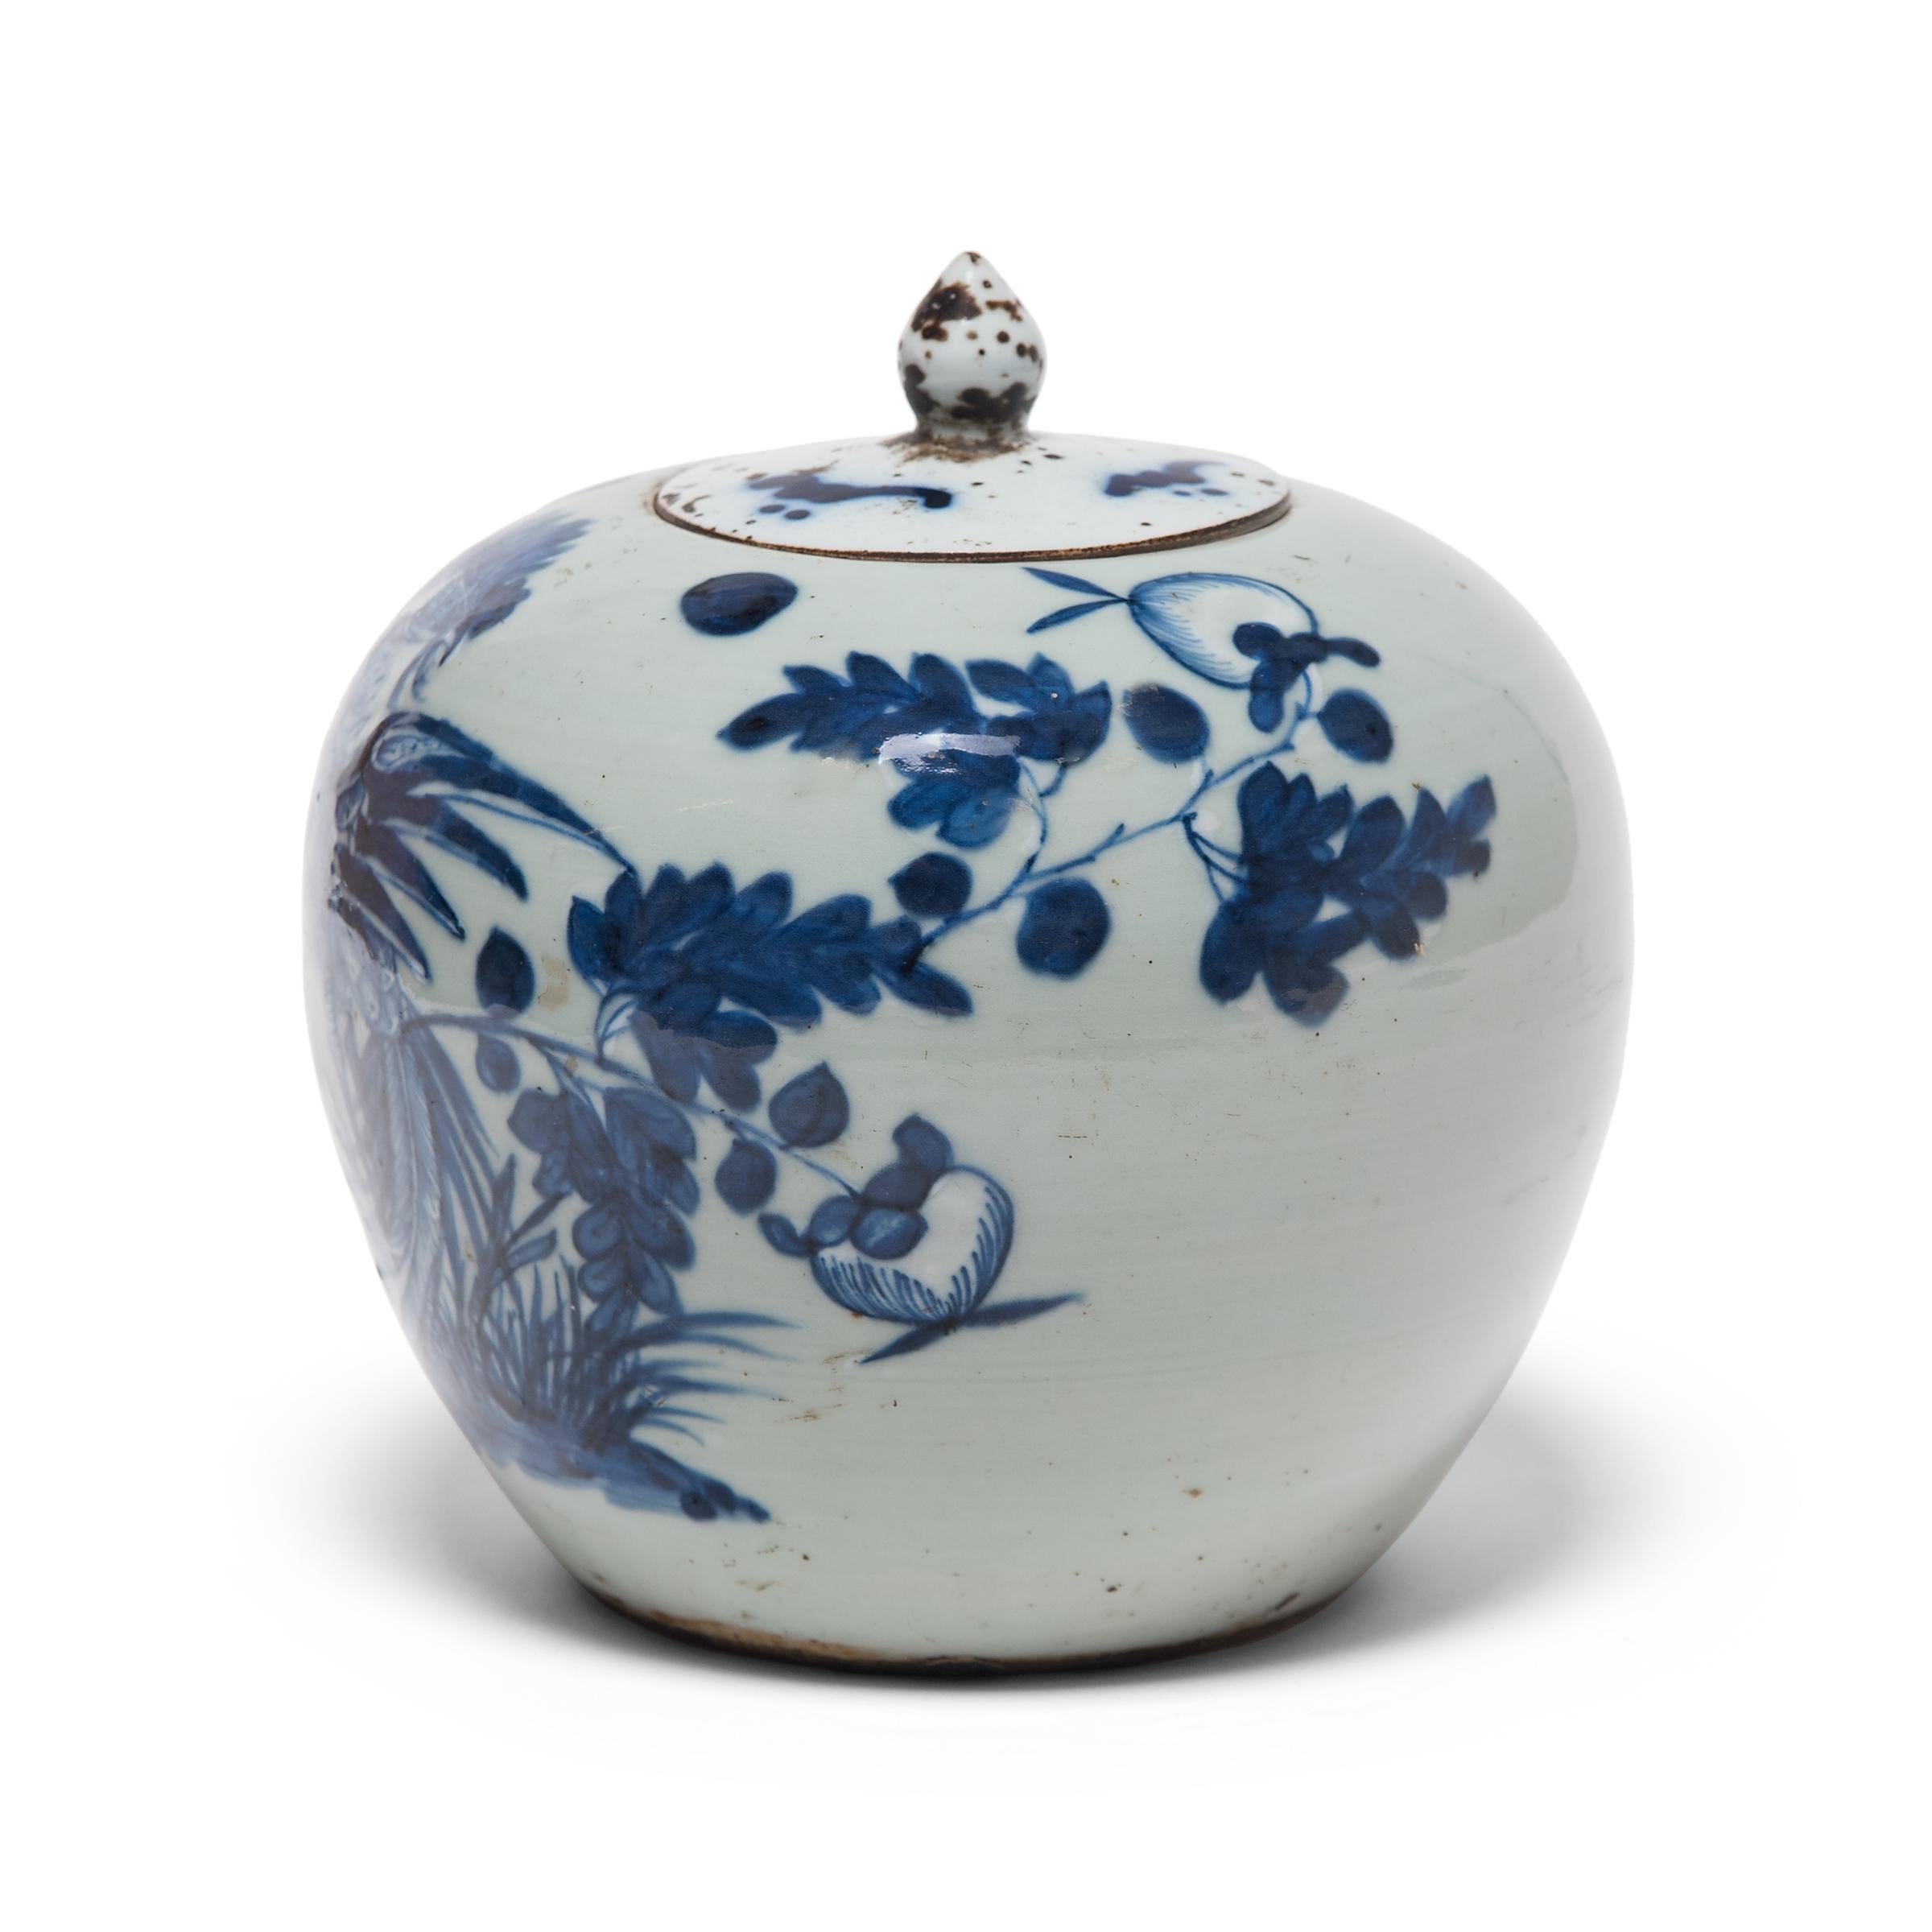 This 19th century blue-and-white ginger jar is defined by its thin walls, round body, and delicate lid topped with a bud-form handle. Painted with expressive brushwork, the jar is festooned with peony blossoms, emblems of spring time and feminine